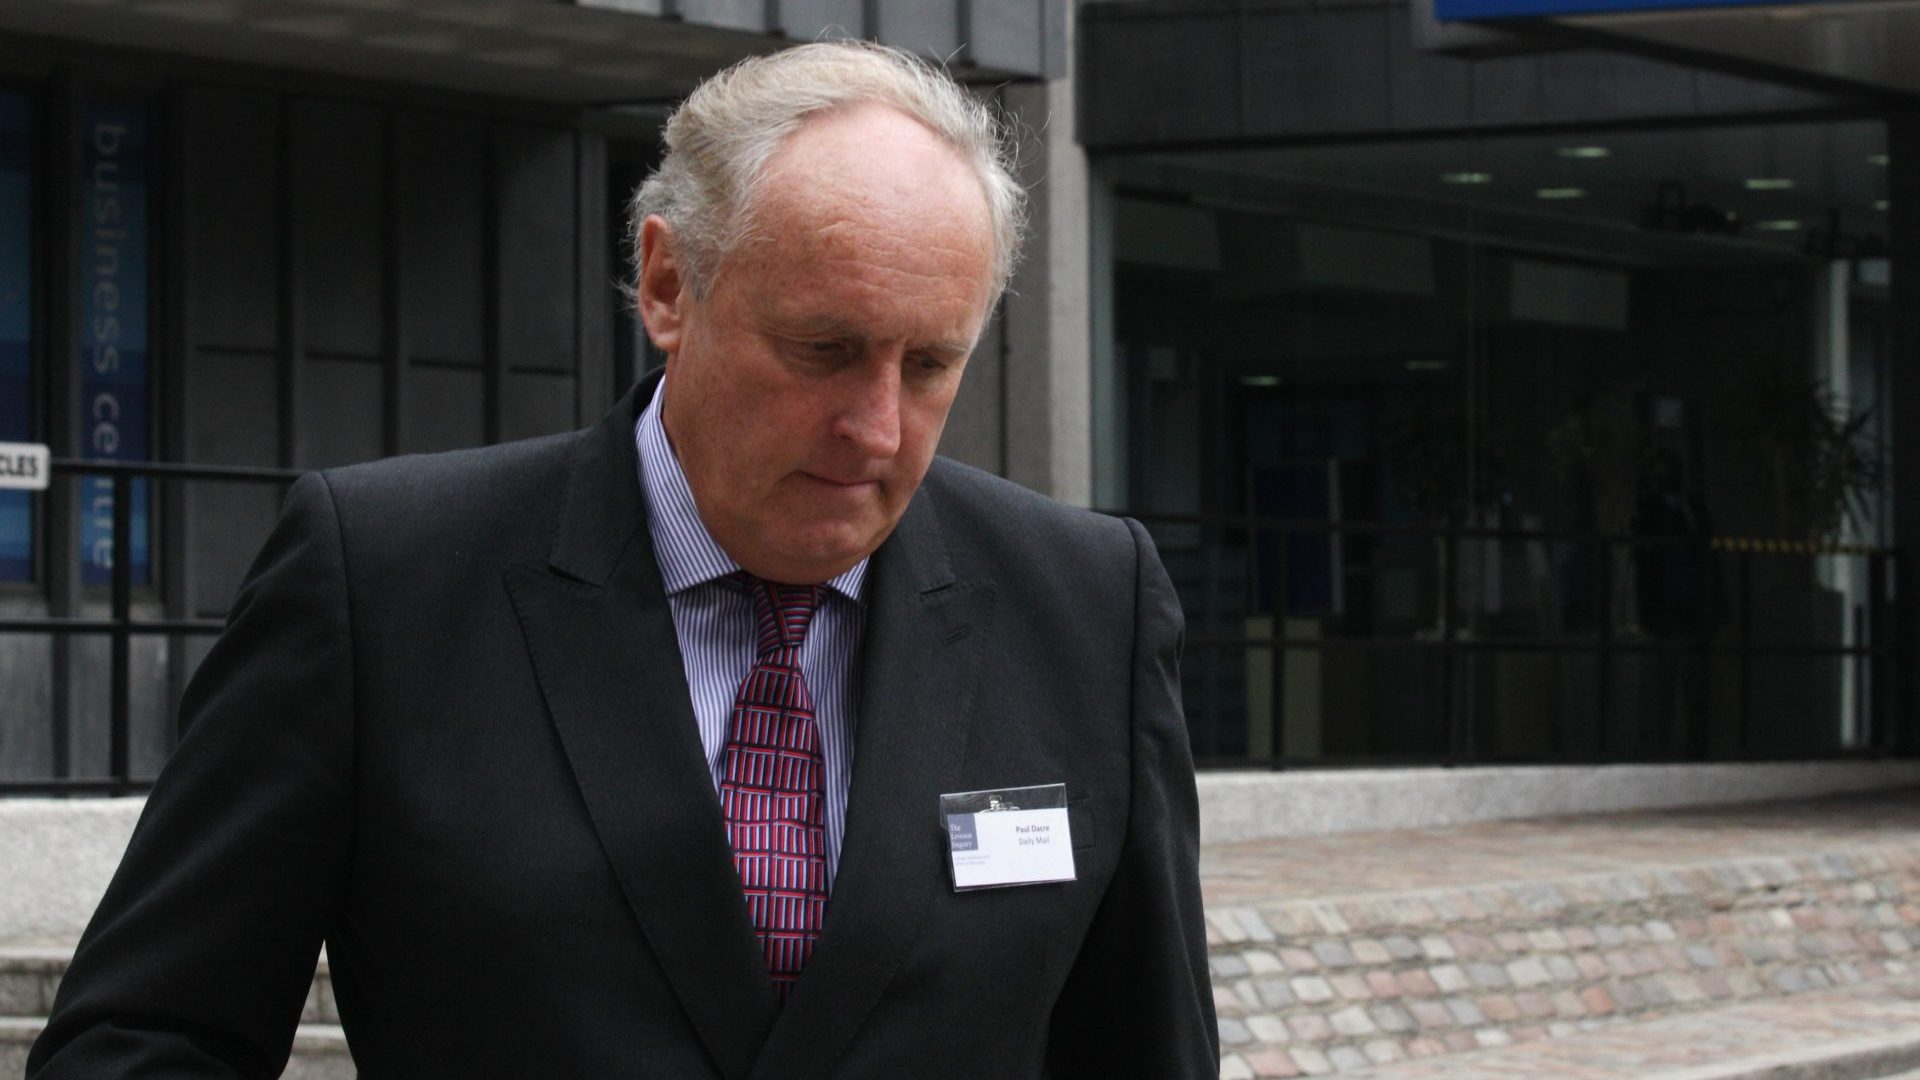 Paul Dacre leaves the 
Leveson inquiry into press ethics, October 2011. Photo: Oli Scarff/Getty
